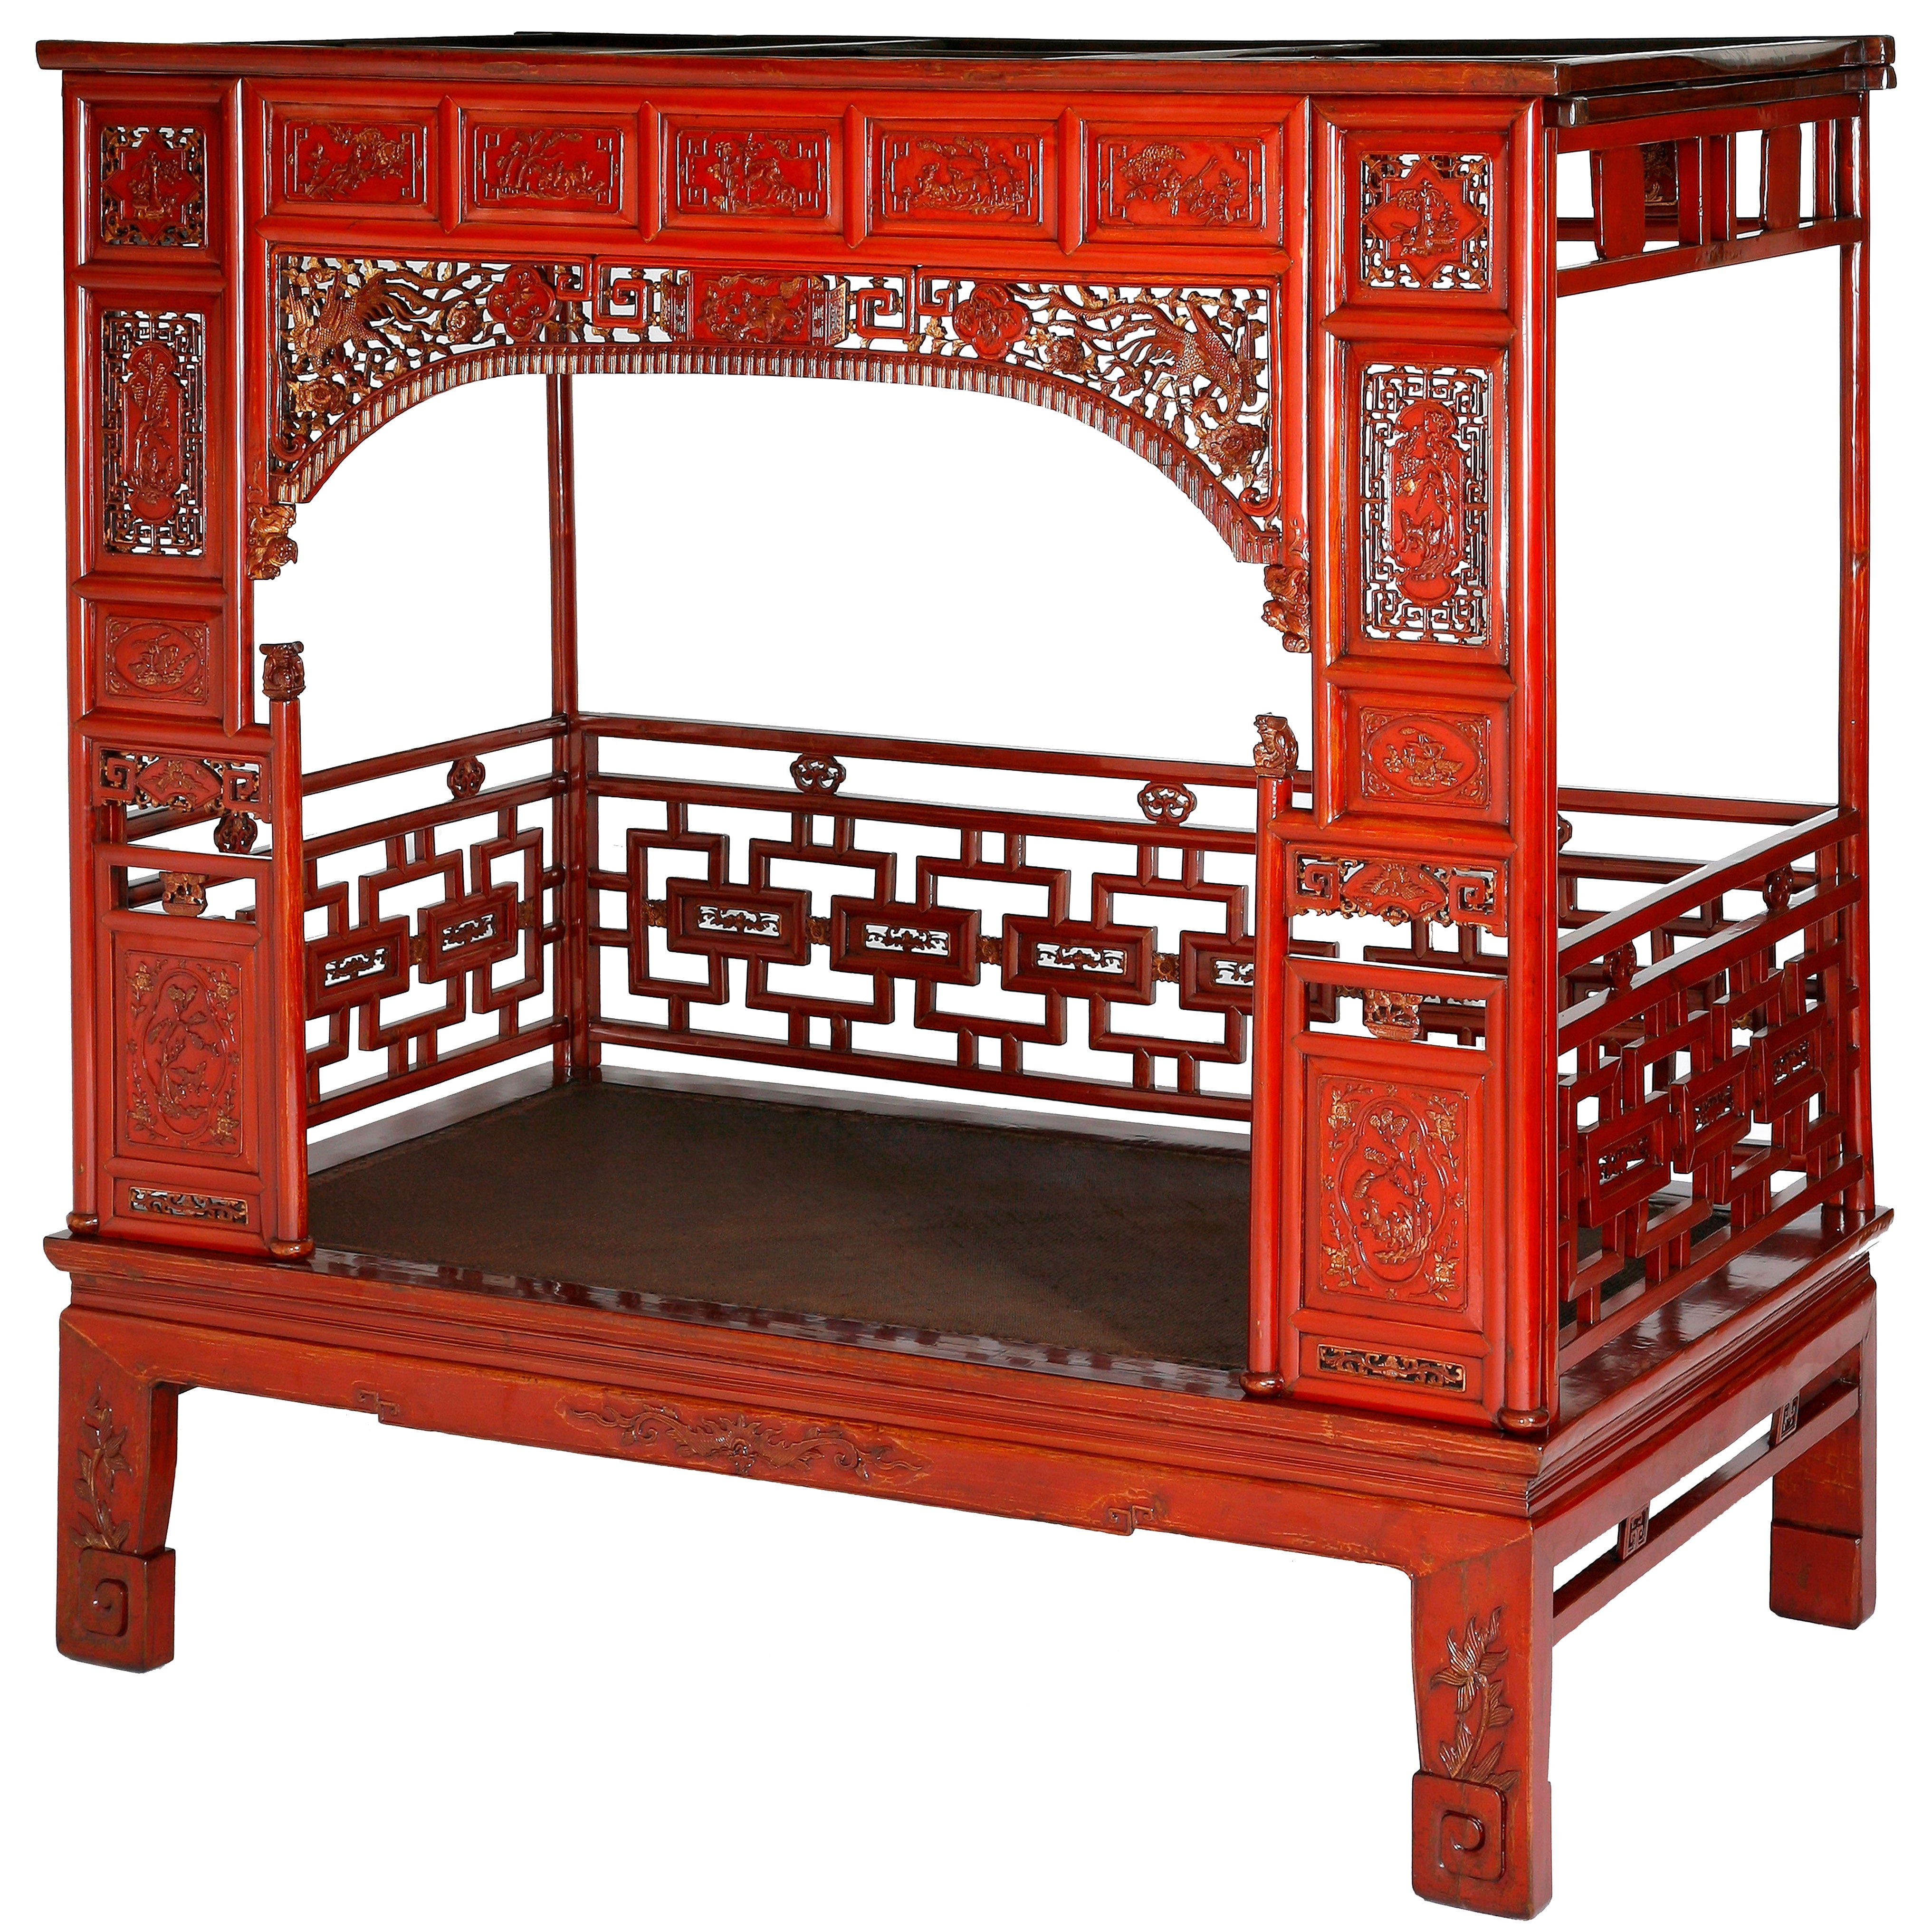 Antique Red Lacquer Gilt Six-Posted Carved Canopy or Wedding Bed, Chinoiserie